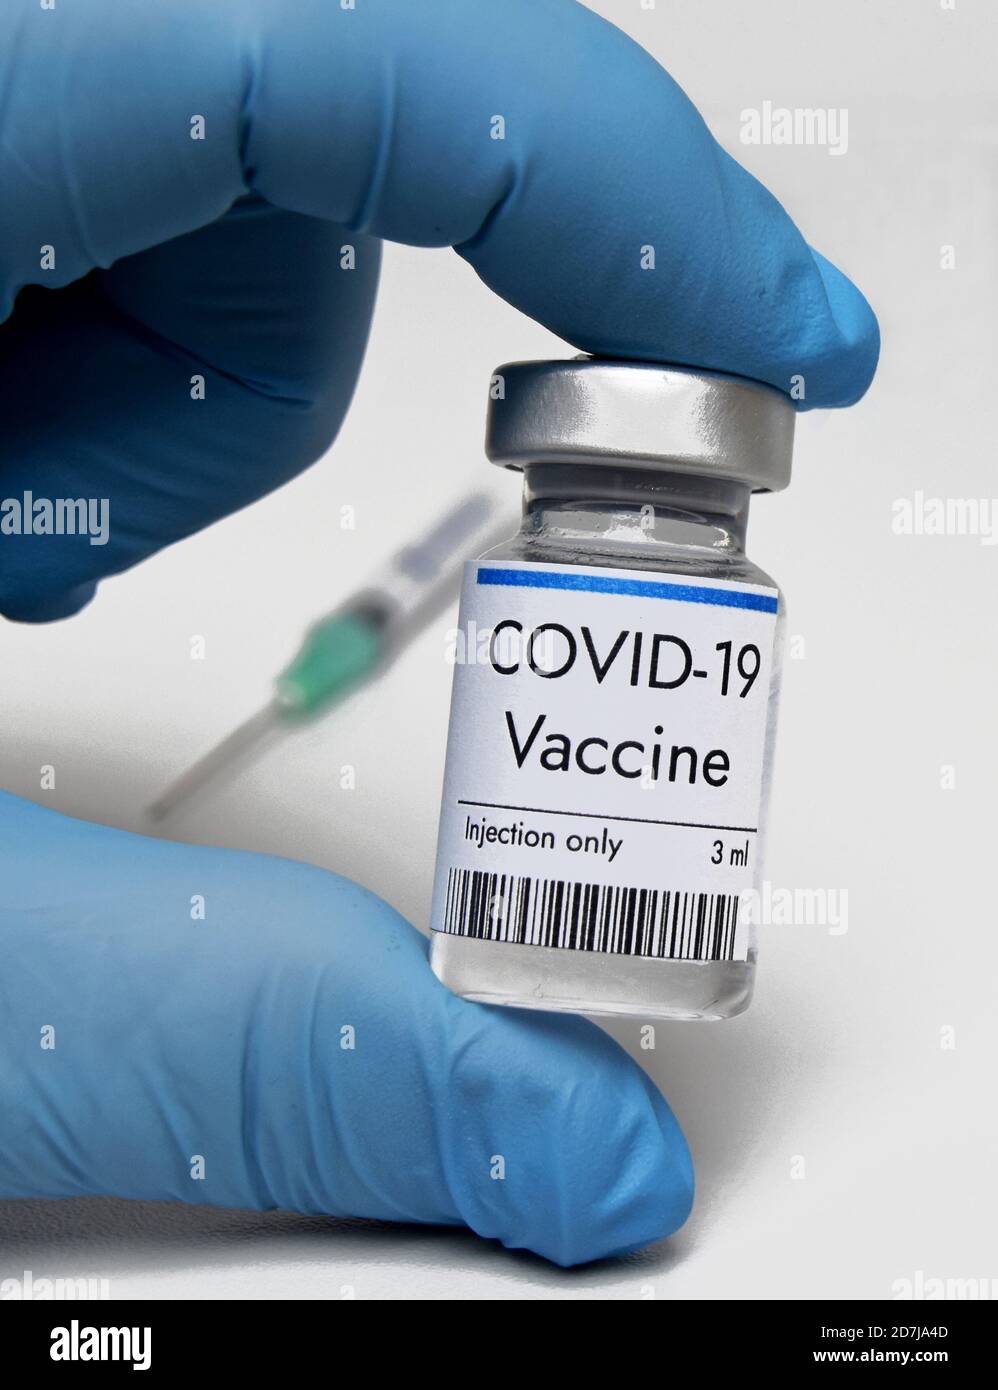 Vaccine against coronavirus in phial at third trial phase at medical laboratory. COVID-19 vaccine at Pfizer. Healthcare and medical concept. Stock Photo